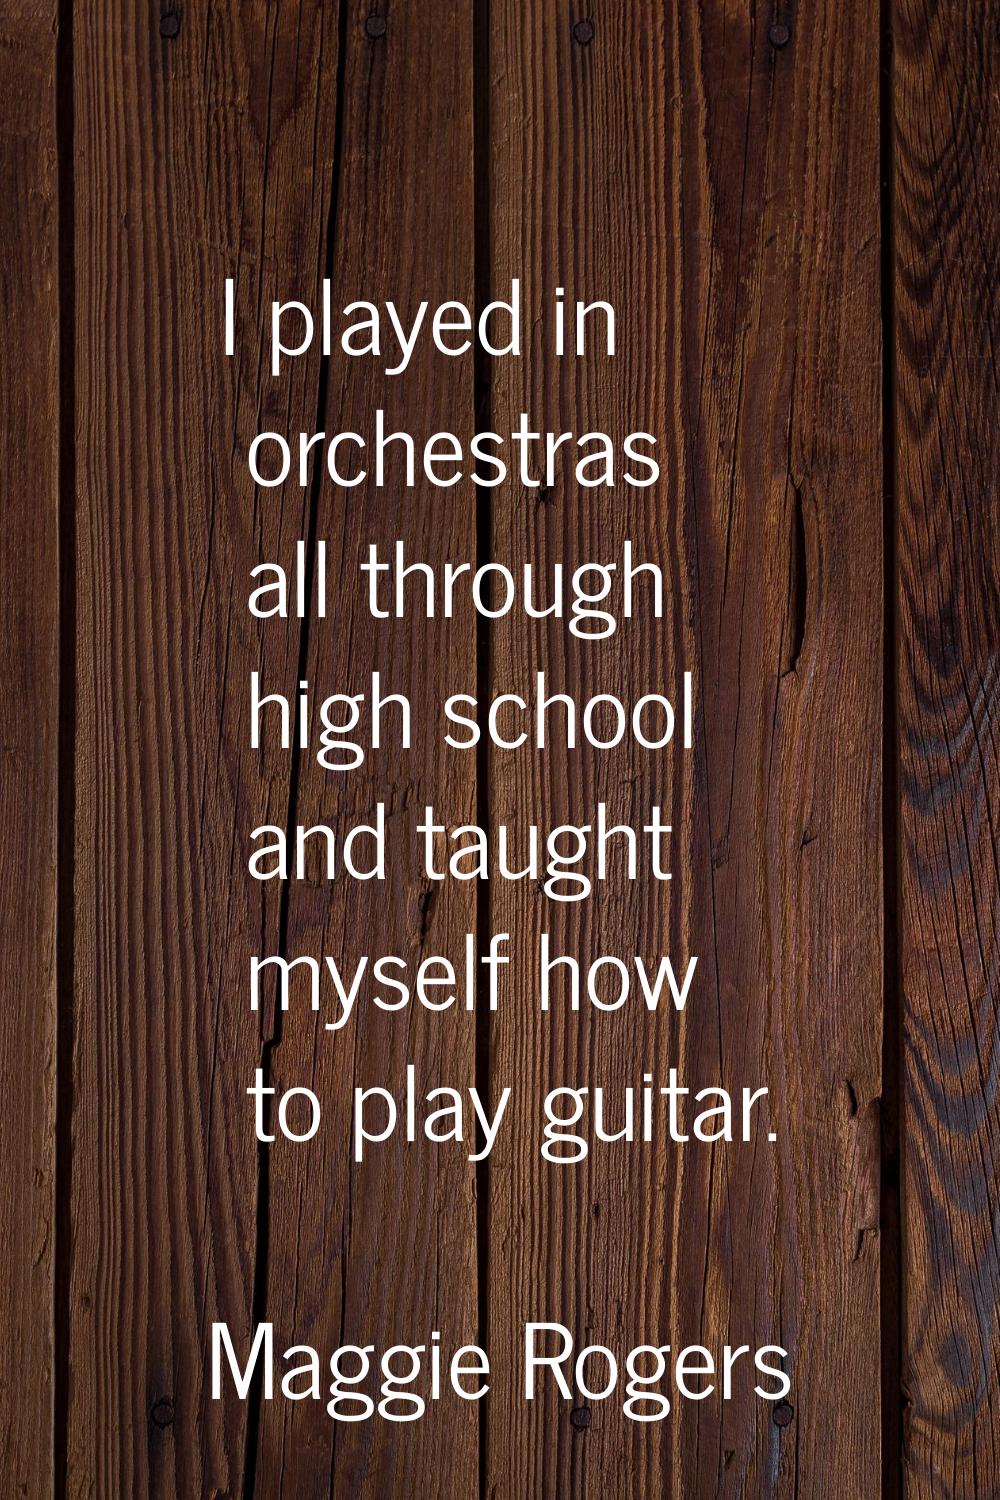 I played in orchestras all through high school and taught myself how to play guitar.